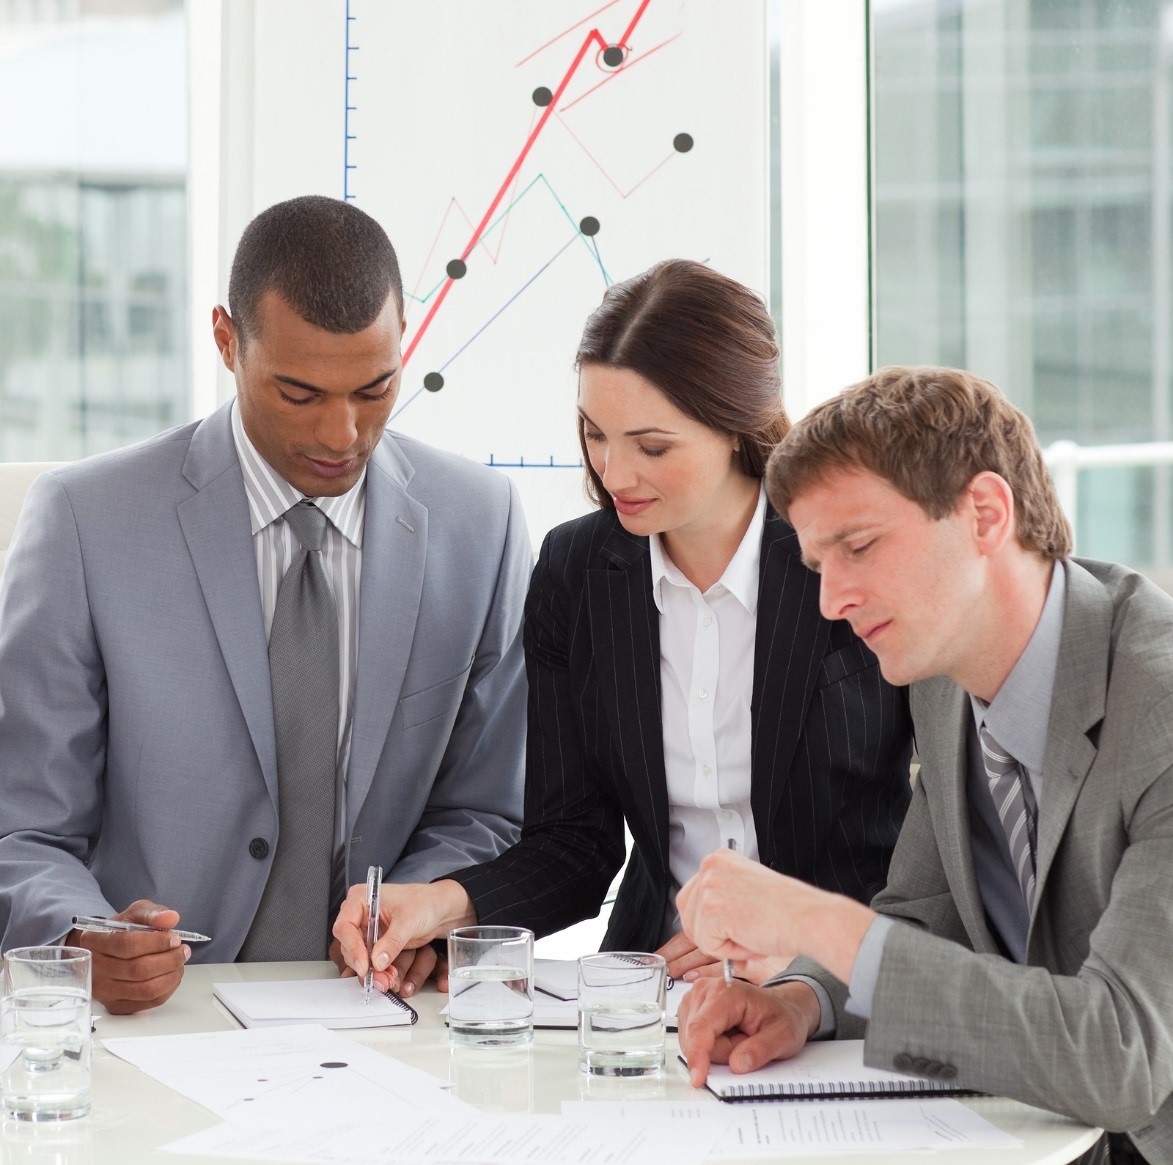 sales management training offers